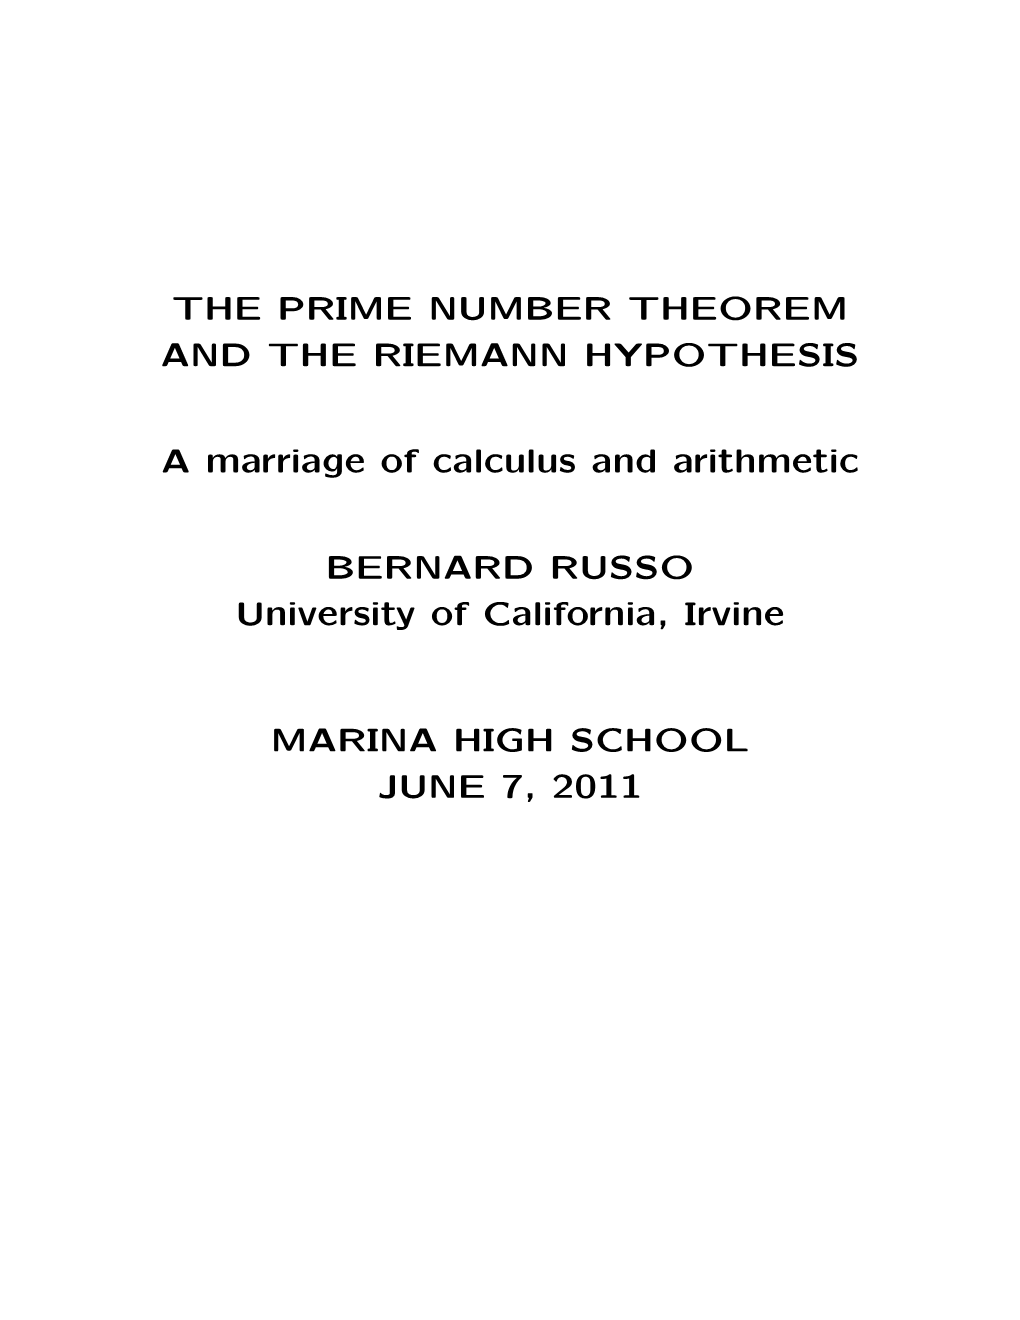 The Prime Number Theorem and the Riemann Hypothesis